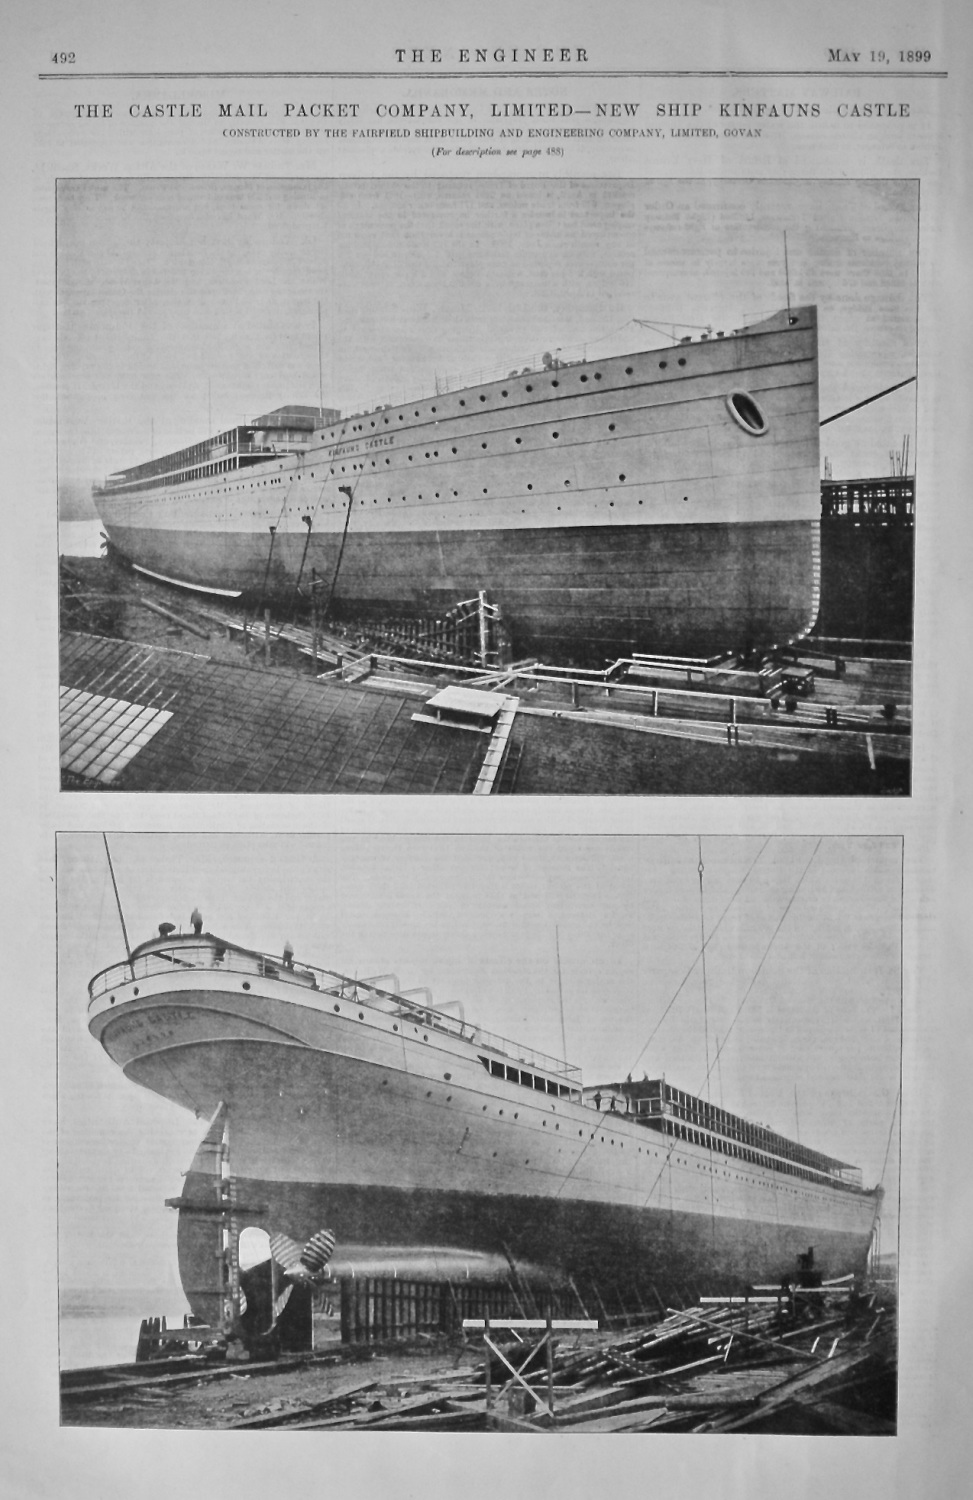 The Castle Mail Packet Company, Limited - New Ship Kinfauns Castle.  1899.